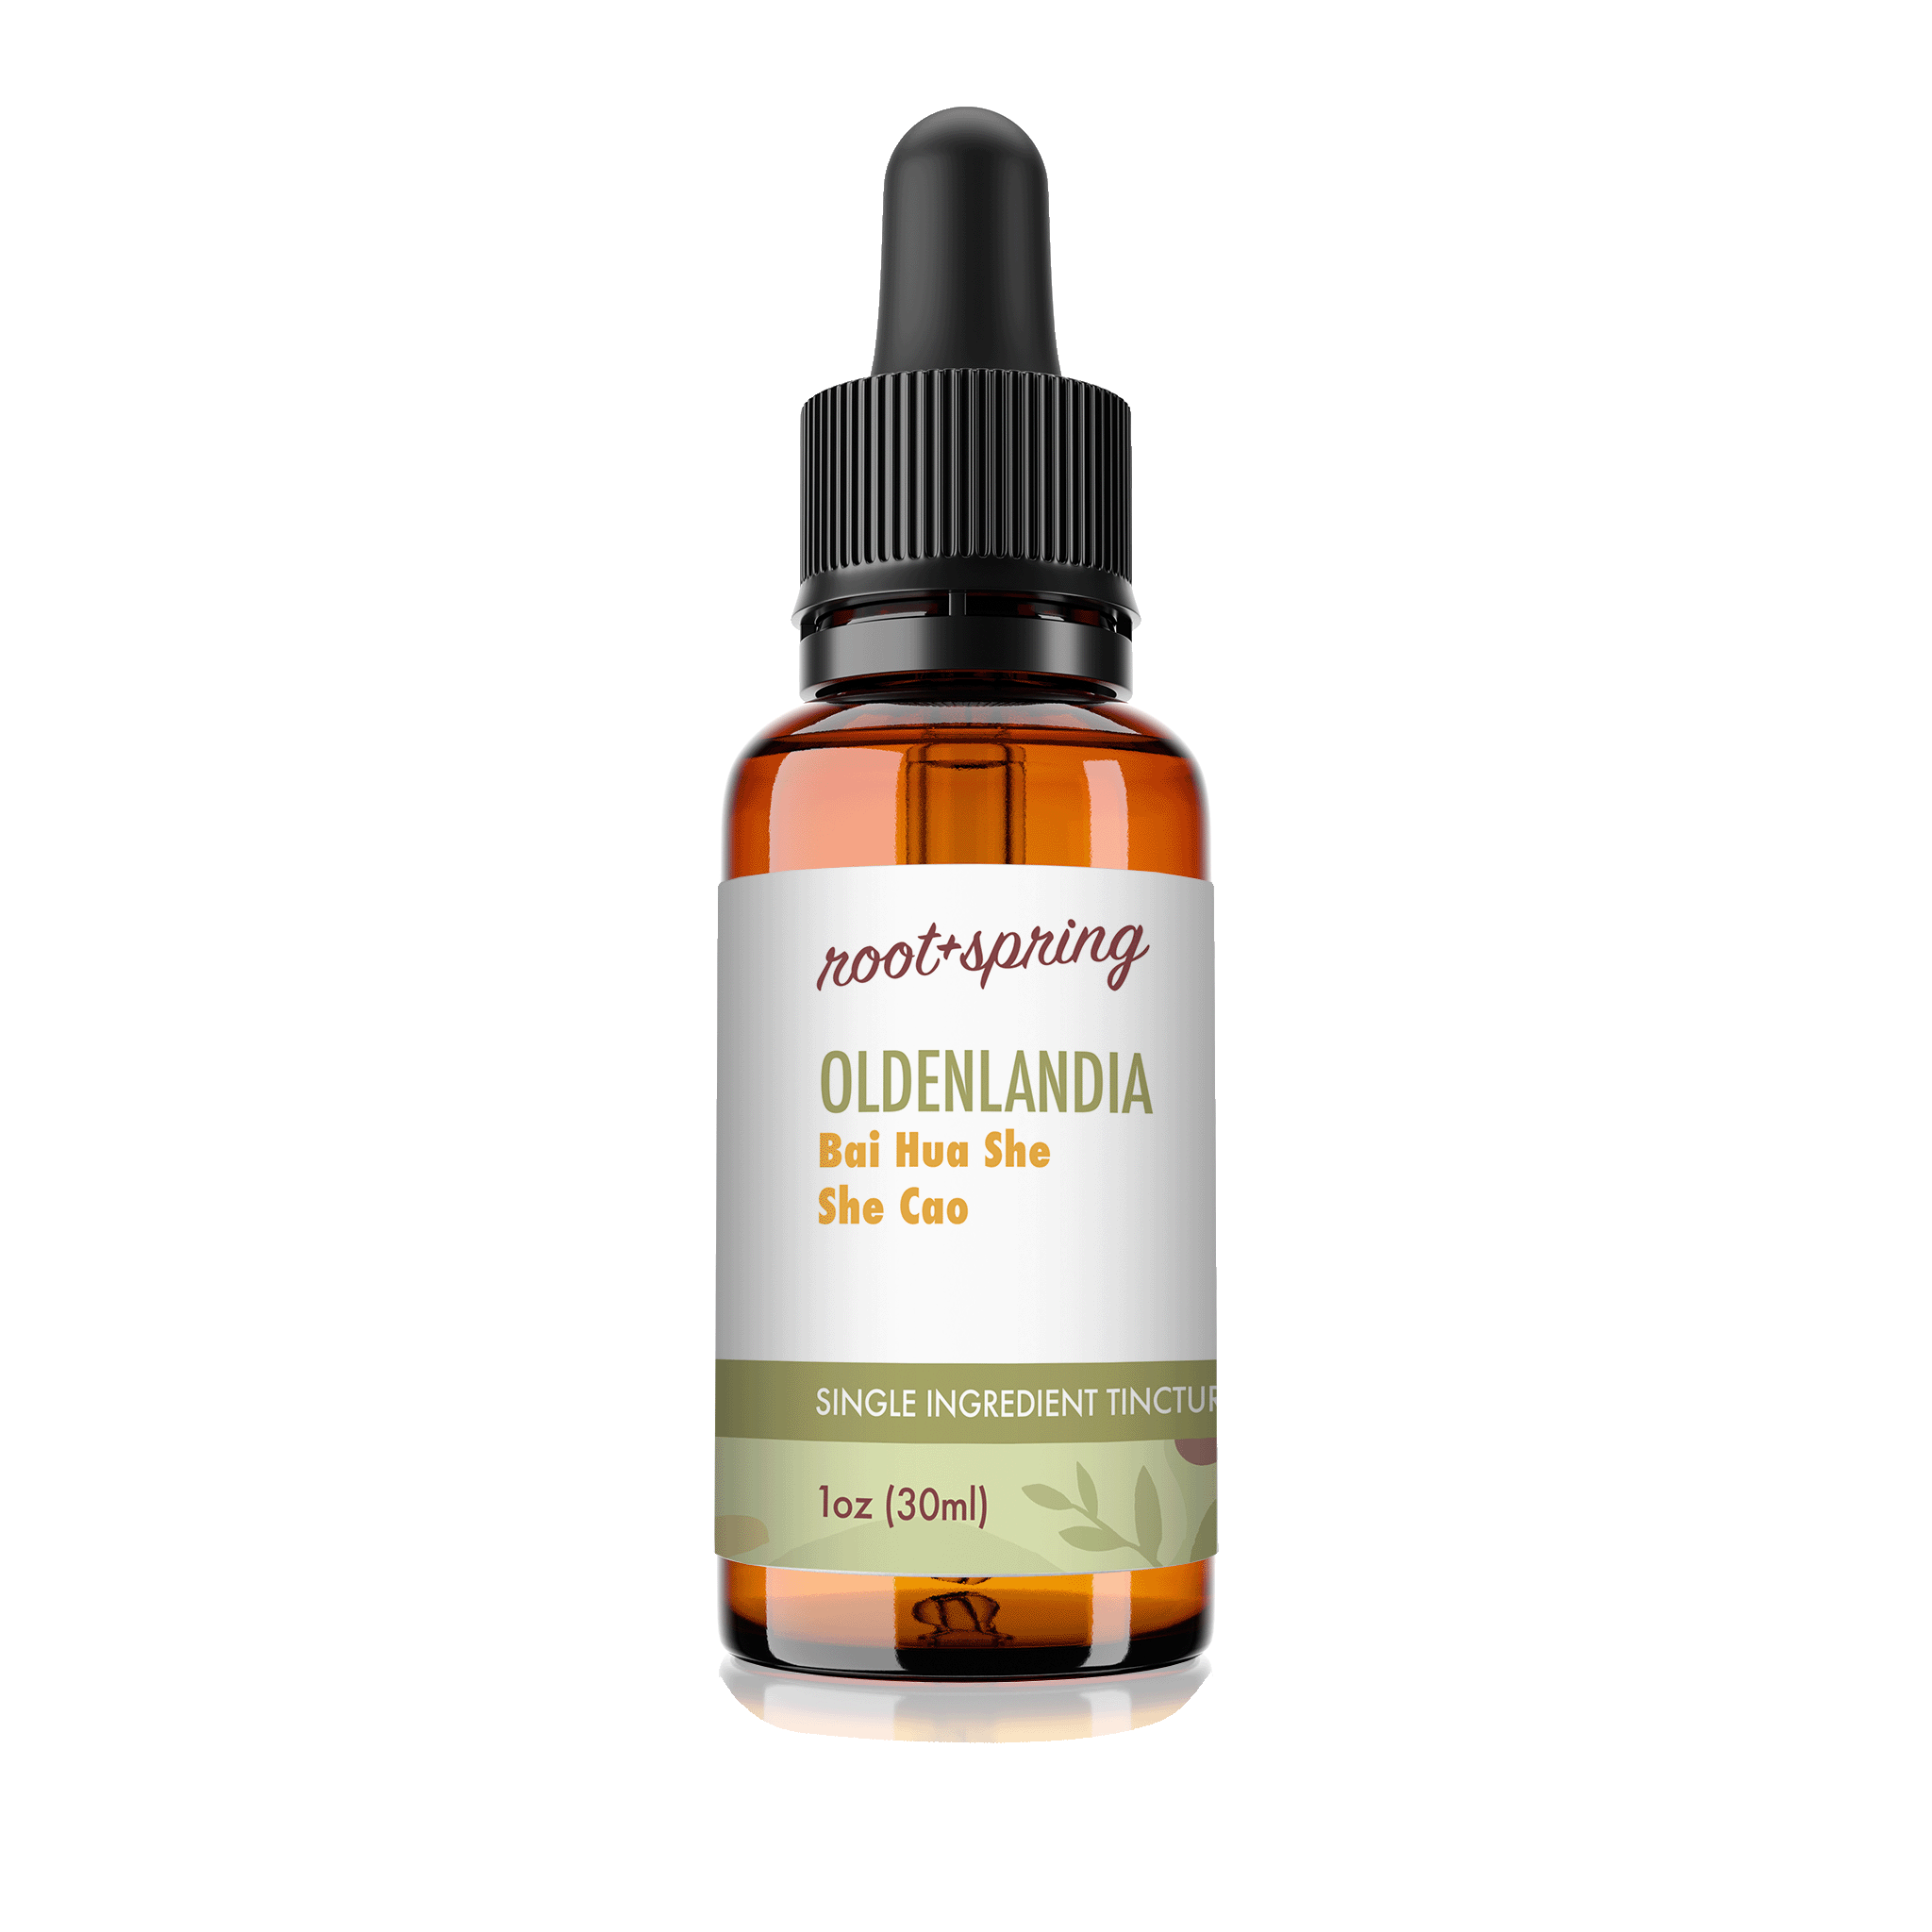 Amber eyedropper-top tincture bottle containing 1 fluid ounce (30 milliliters) of root + spring Dissolve Mass Stasis Breaker Chinese herbal tincture.